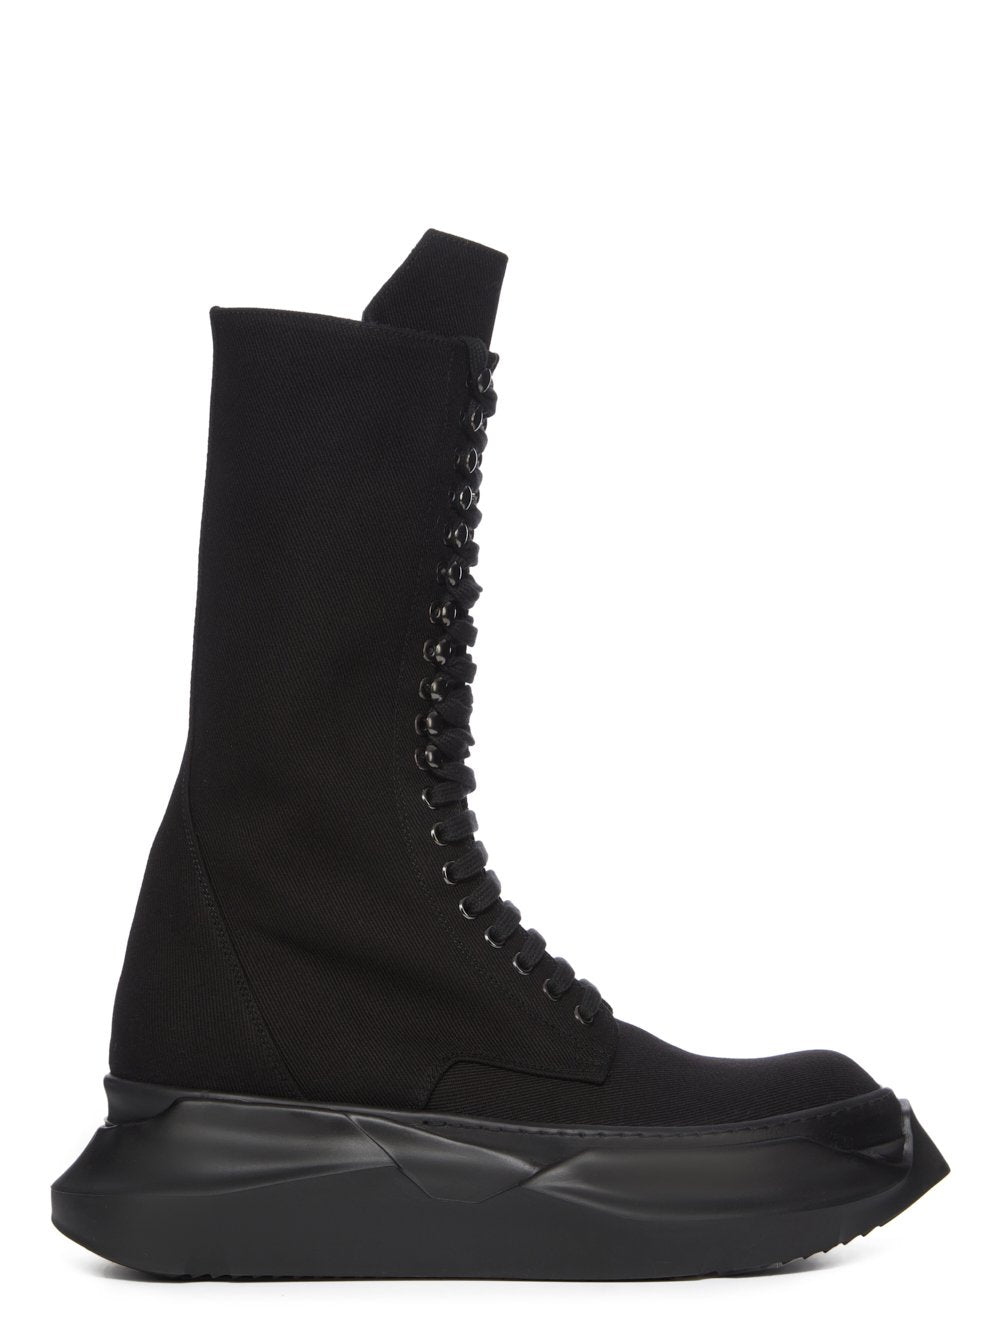 Rick Owens EDFU Denim Cargo Army Abstract Boots – SECTS SHOP